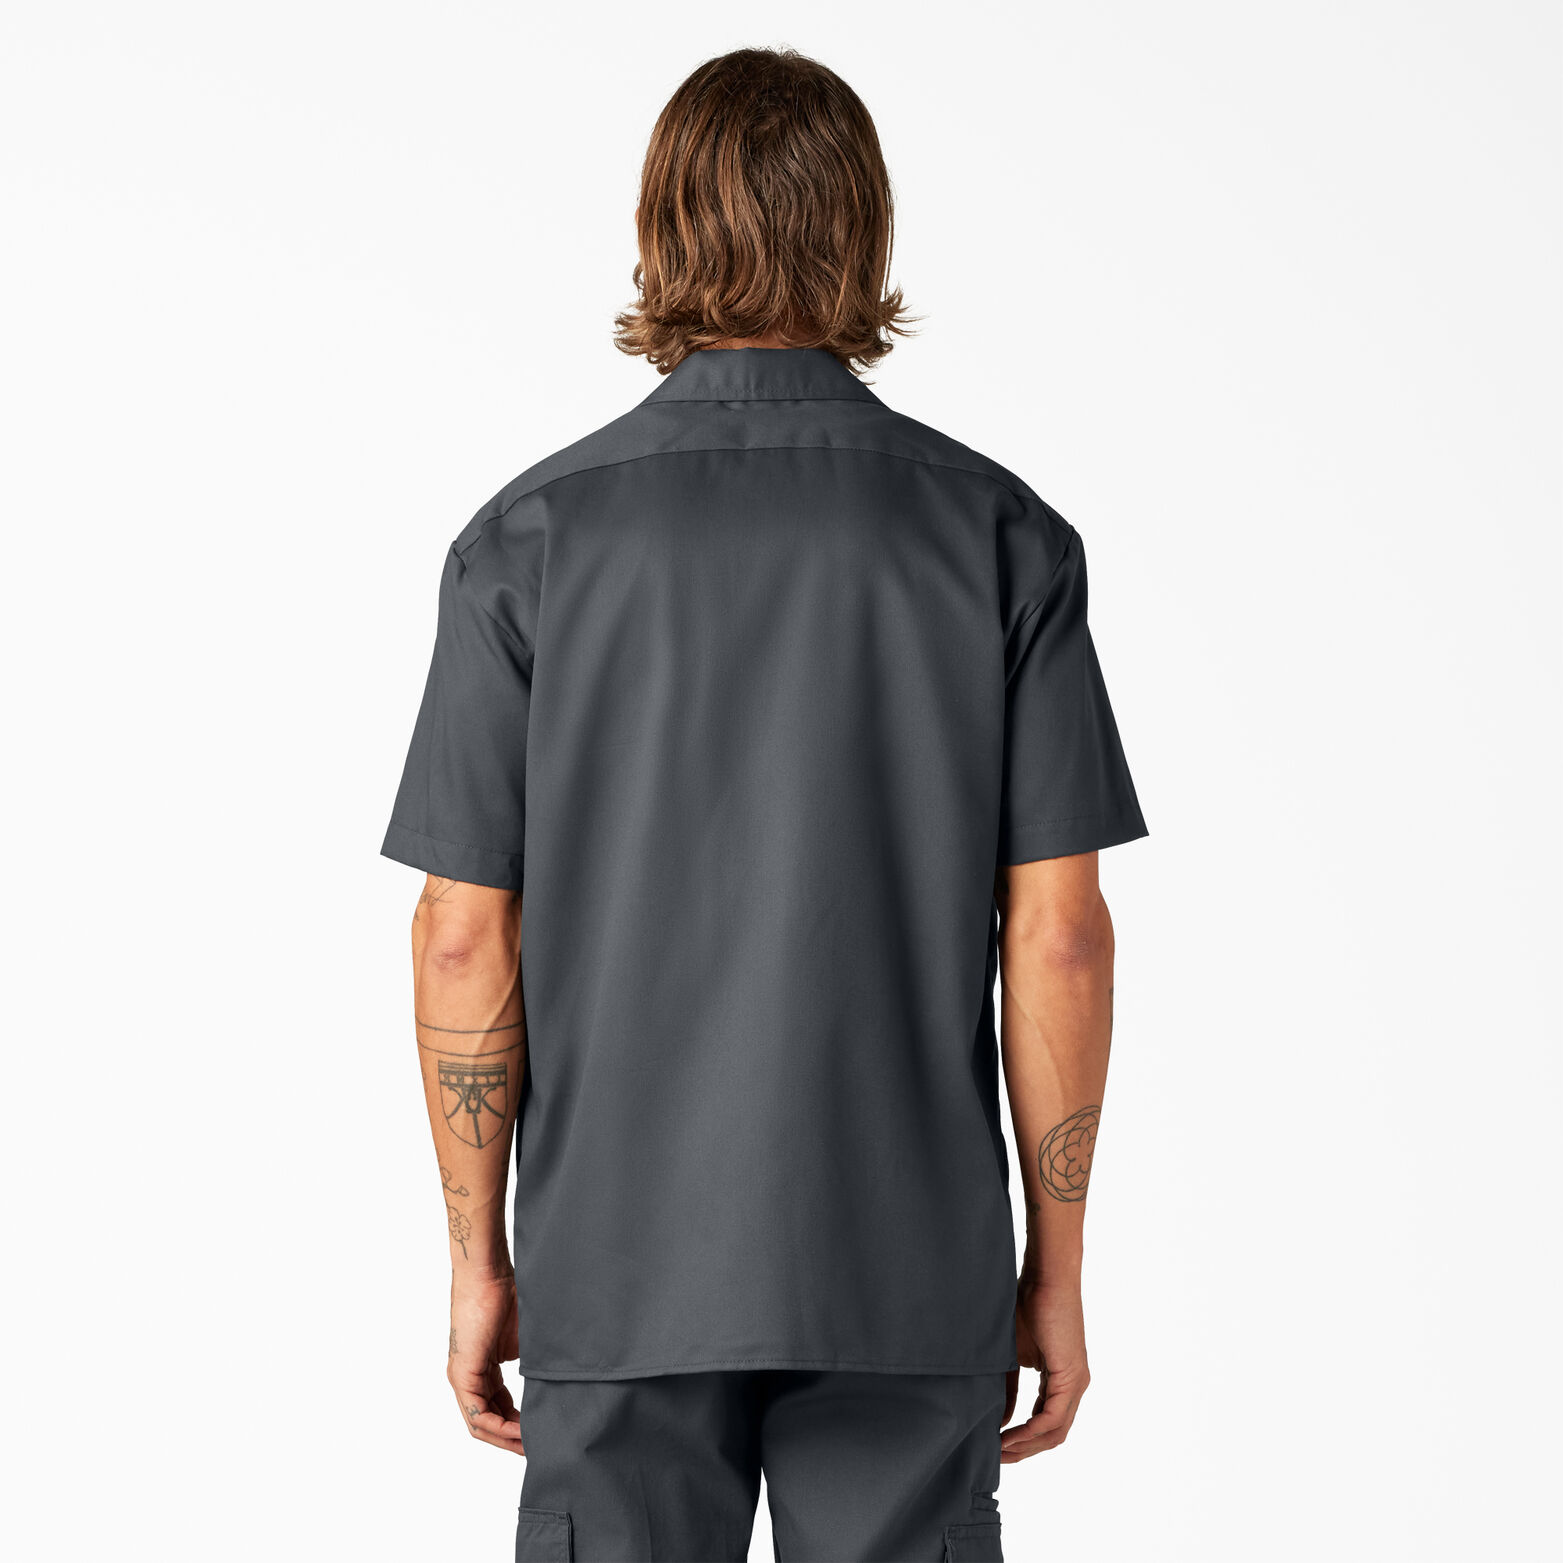 Dickies Men's Relaxed Fit Short Sleeve Collared Cotton Polyester Work Shirt - 1 Each